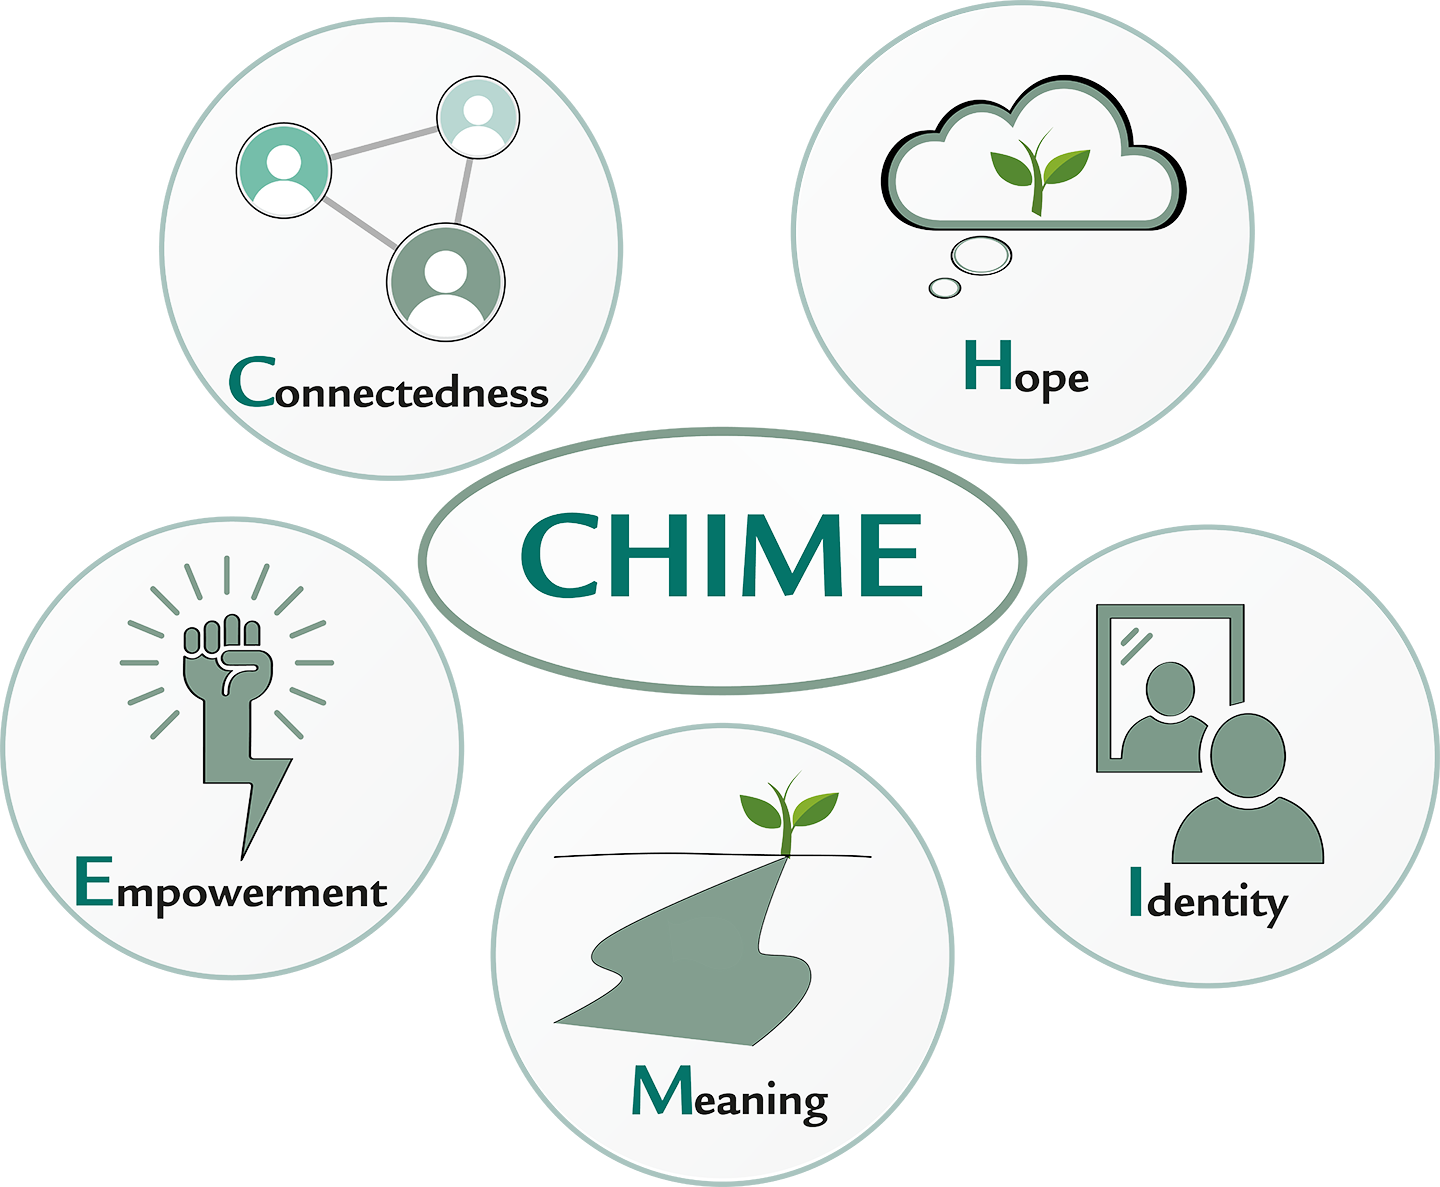 CHIME - Connectedness, Hope, Identity, Meaning, Empowerment